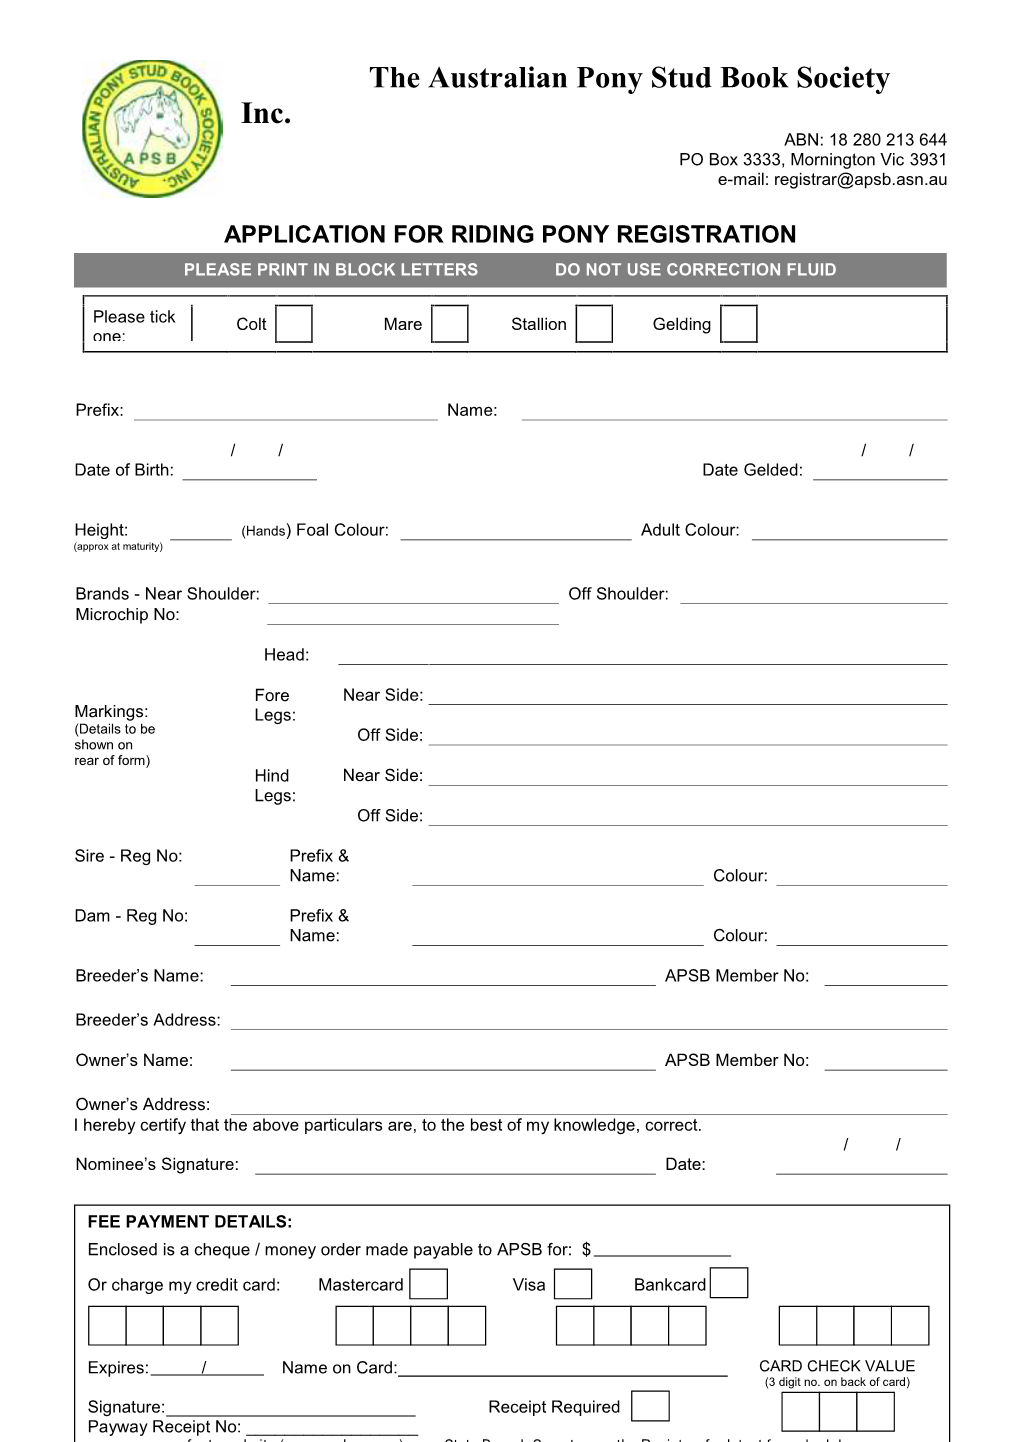 Riding Pony Registration Please Print in Block Letters Do Not Use Correction Fluid